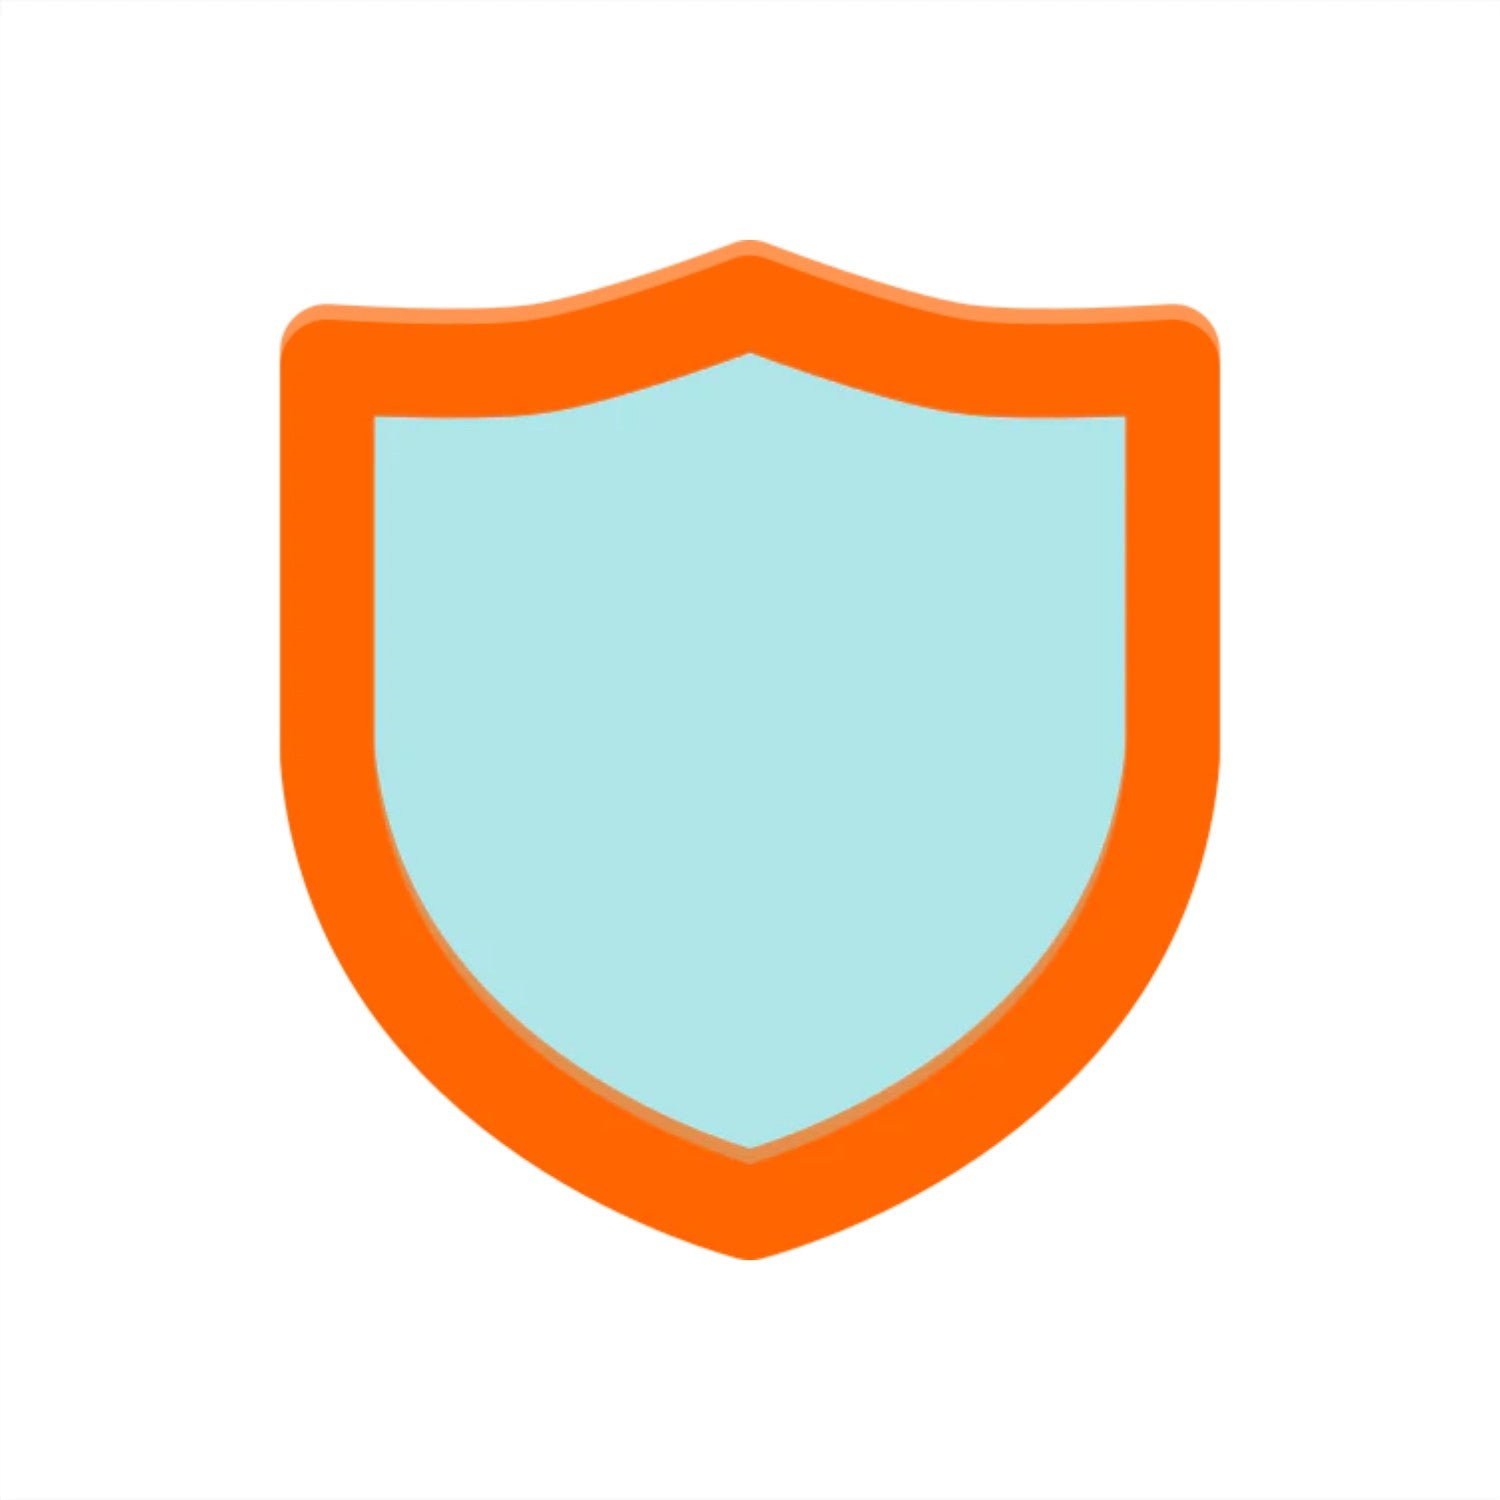 A simple graphic of a shield, featuring a light blue center outlined with a thick orange border, set against a plain white background, representing the SafeTelecom Customer Service icon.